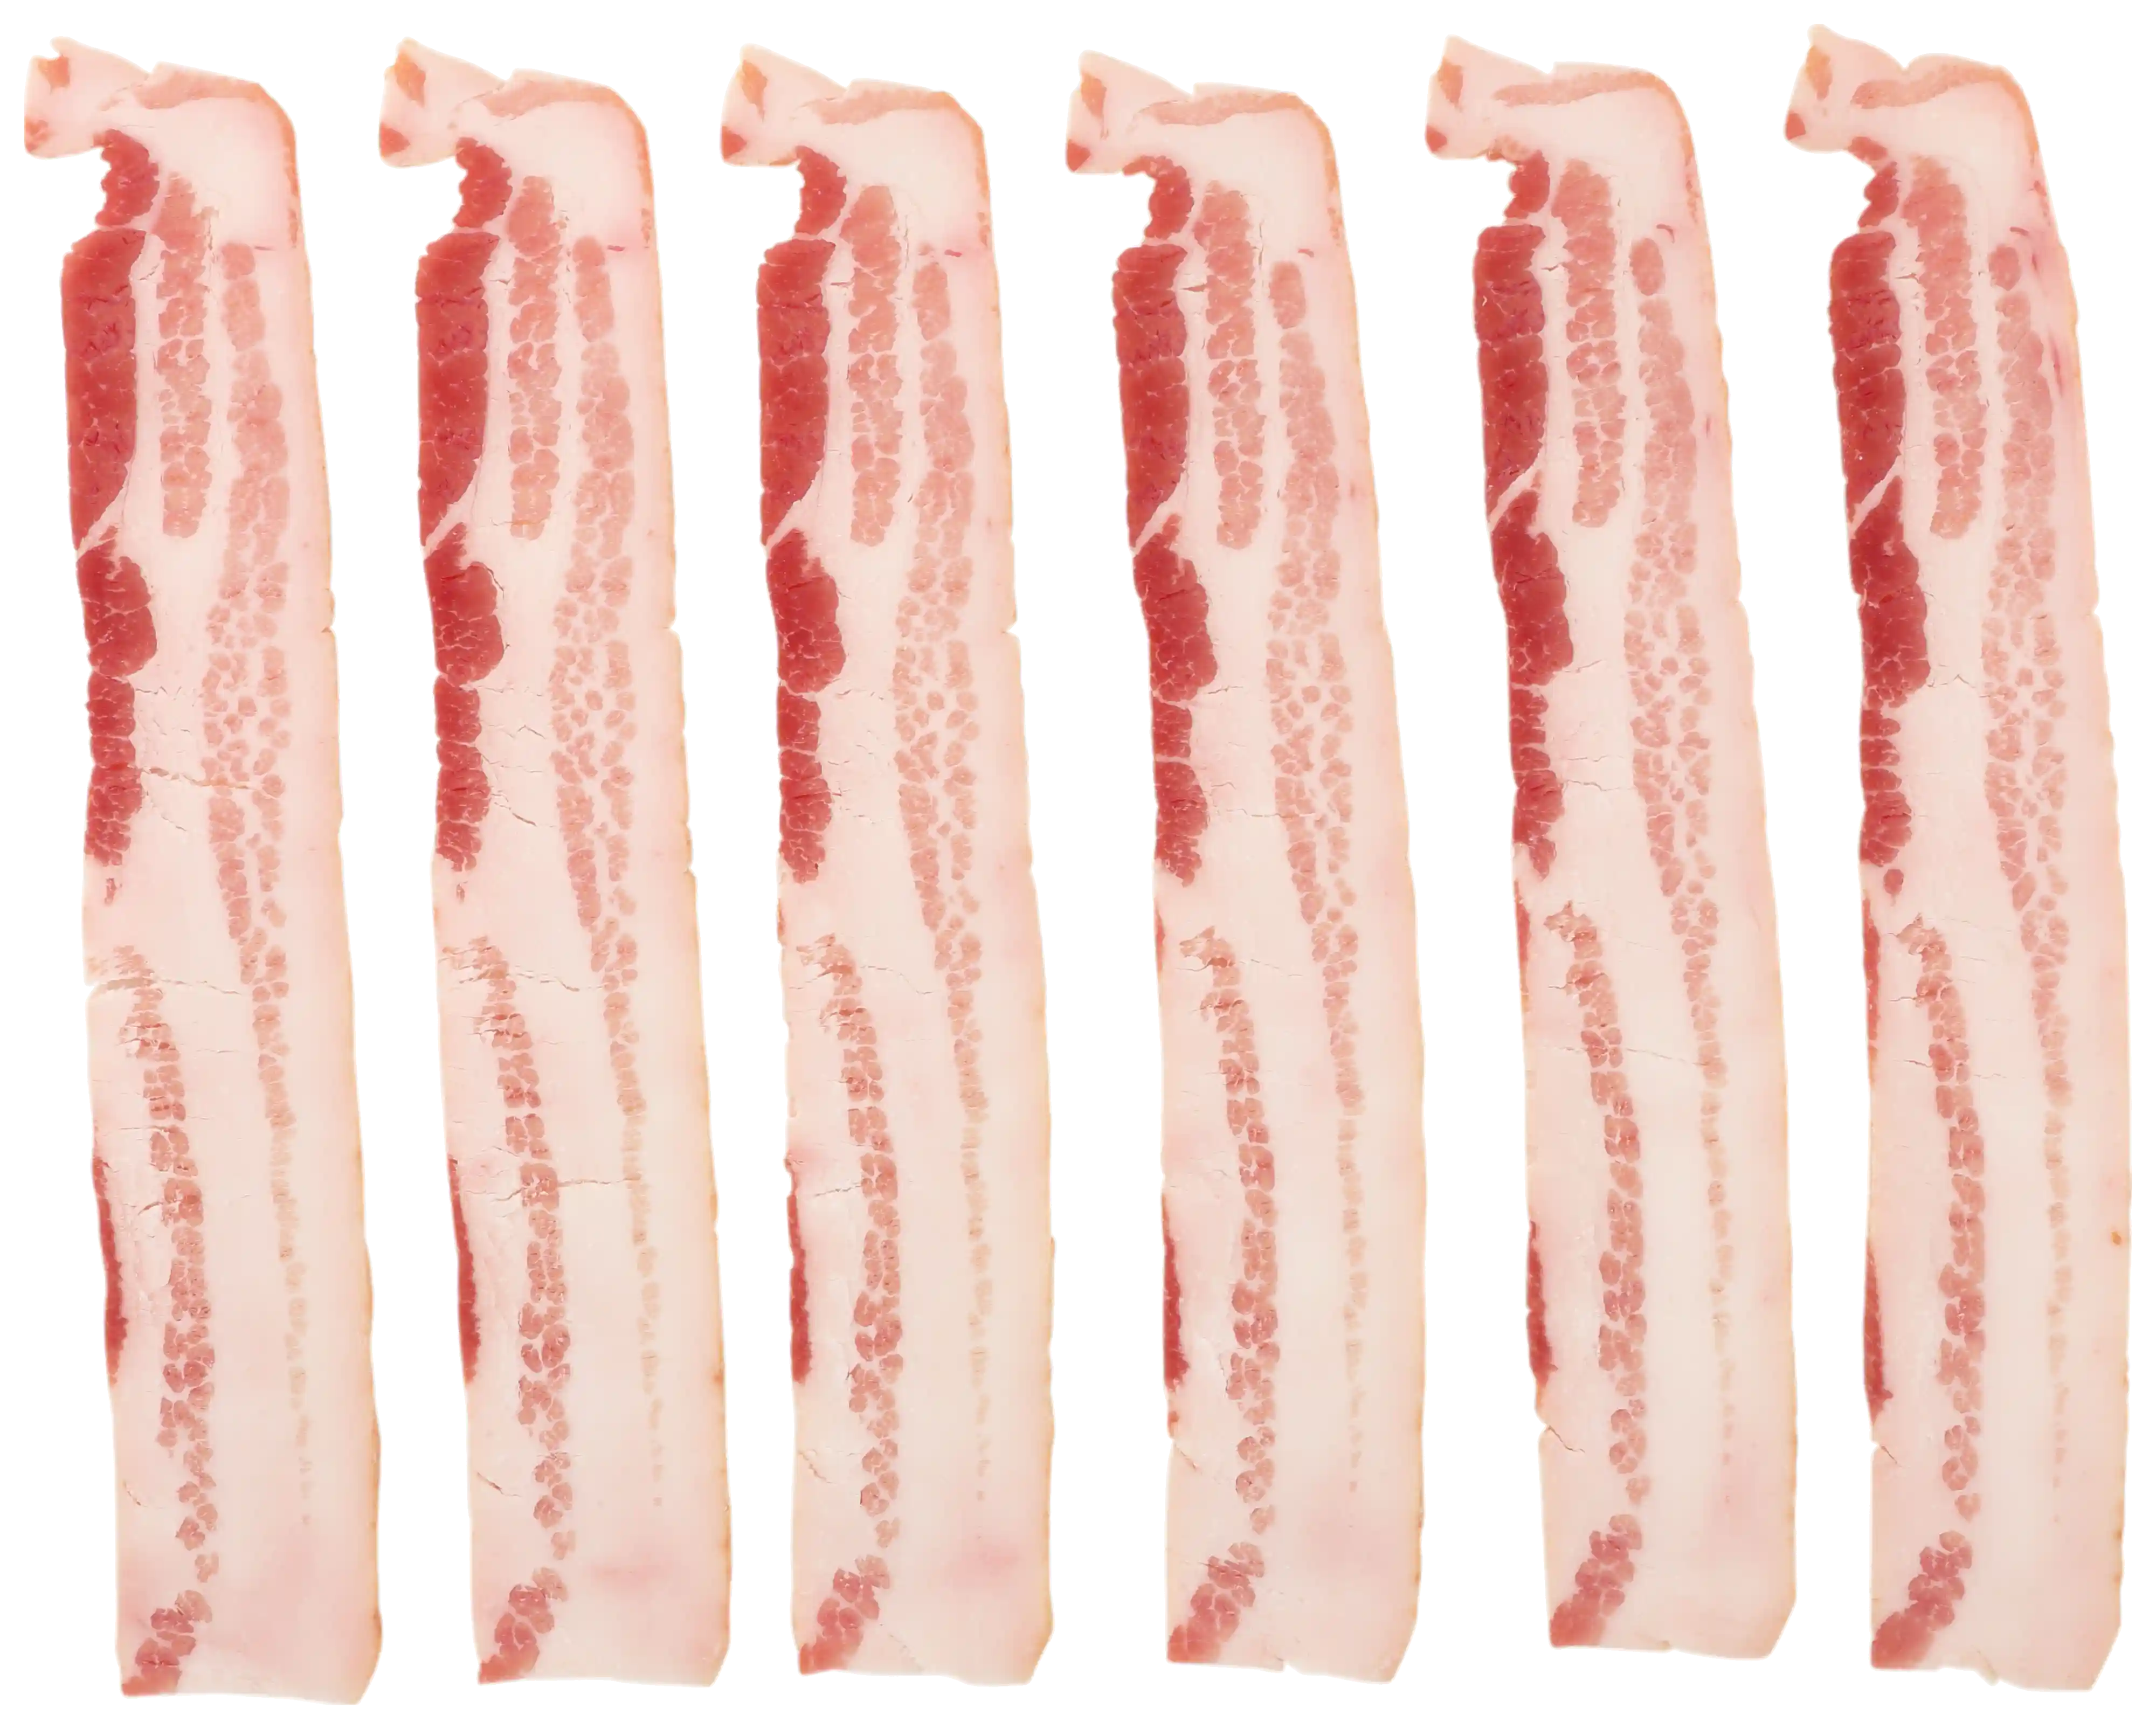 Wright® Brand Naturally Hickory Smoked Regular Sliced Bacon, Bulk, 15 Lbs, 6 Slices/Inch, Frozen_image_11